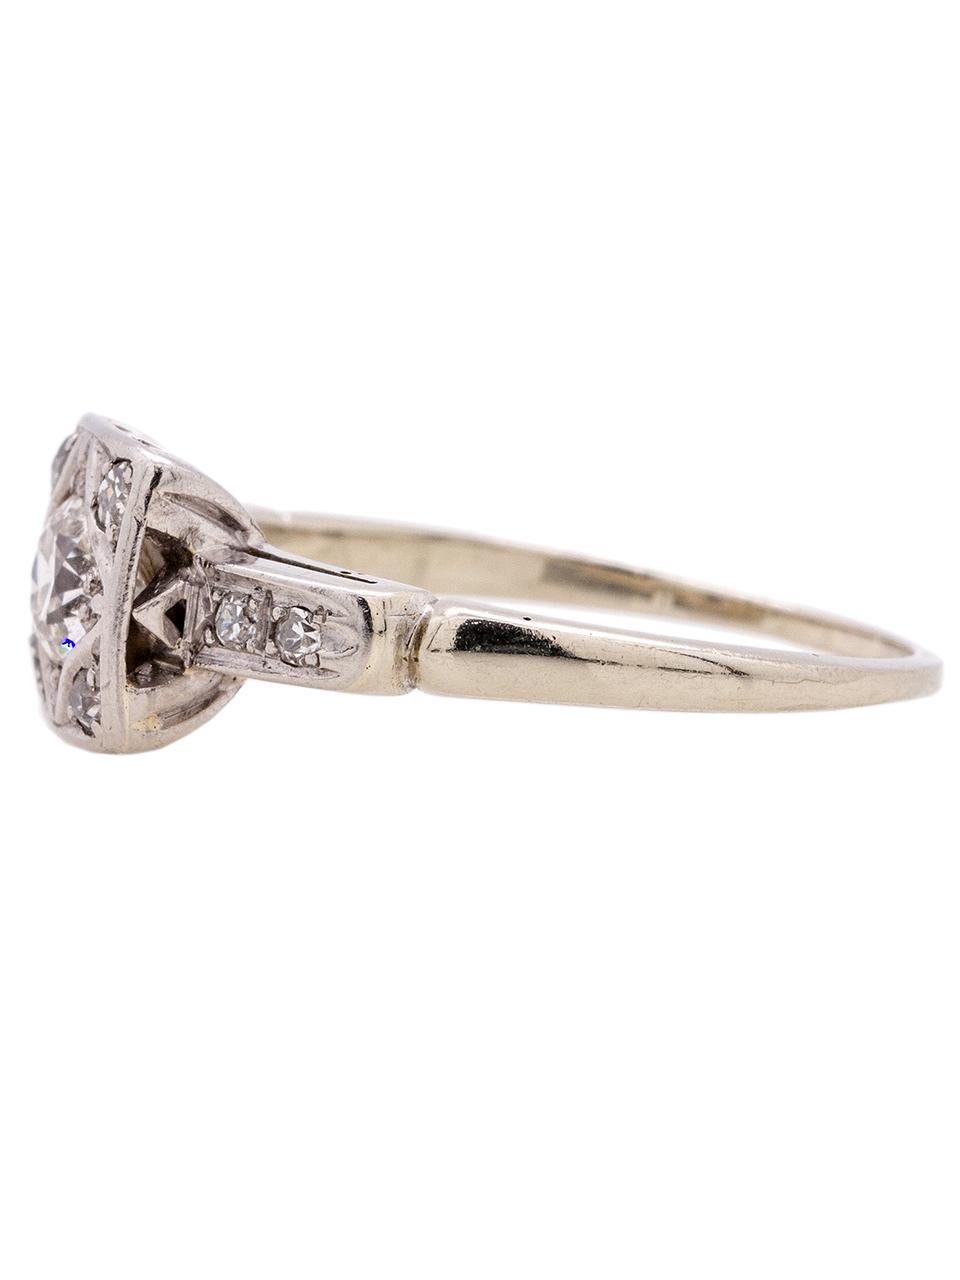 Lovely vintage Art Deco 14k white gold diamond engagement ring with square illusion setting featuring a stunning 0.40ct Old European Cut center diamond (J-SI2), surrounded by eight small round single cut side diamonds, adding an additional .20ct,